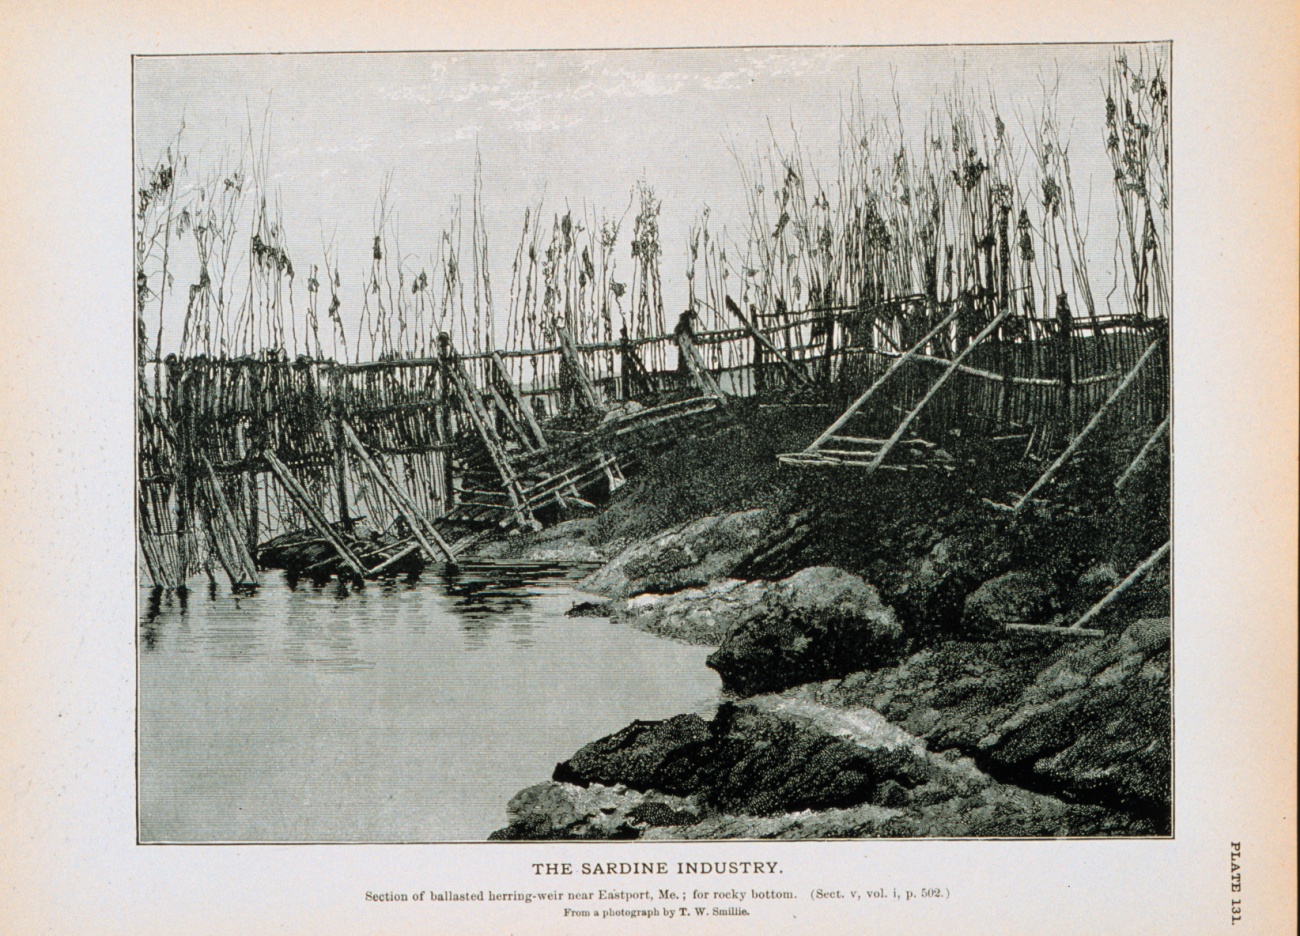 Section of ballasted weir near Eastport, Maine; for rocky bottomFrom a photograph by T